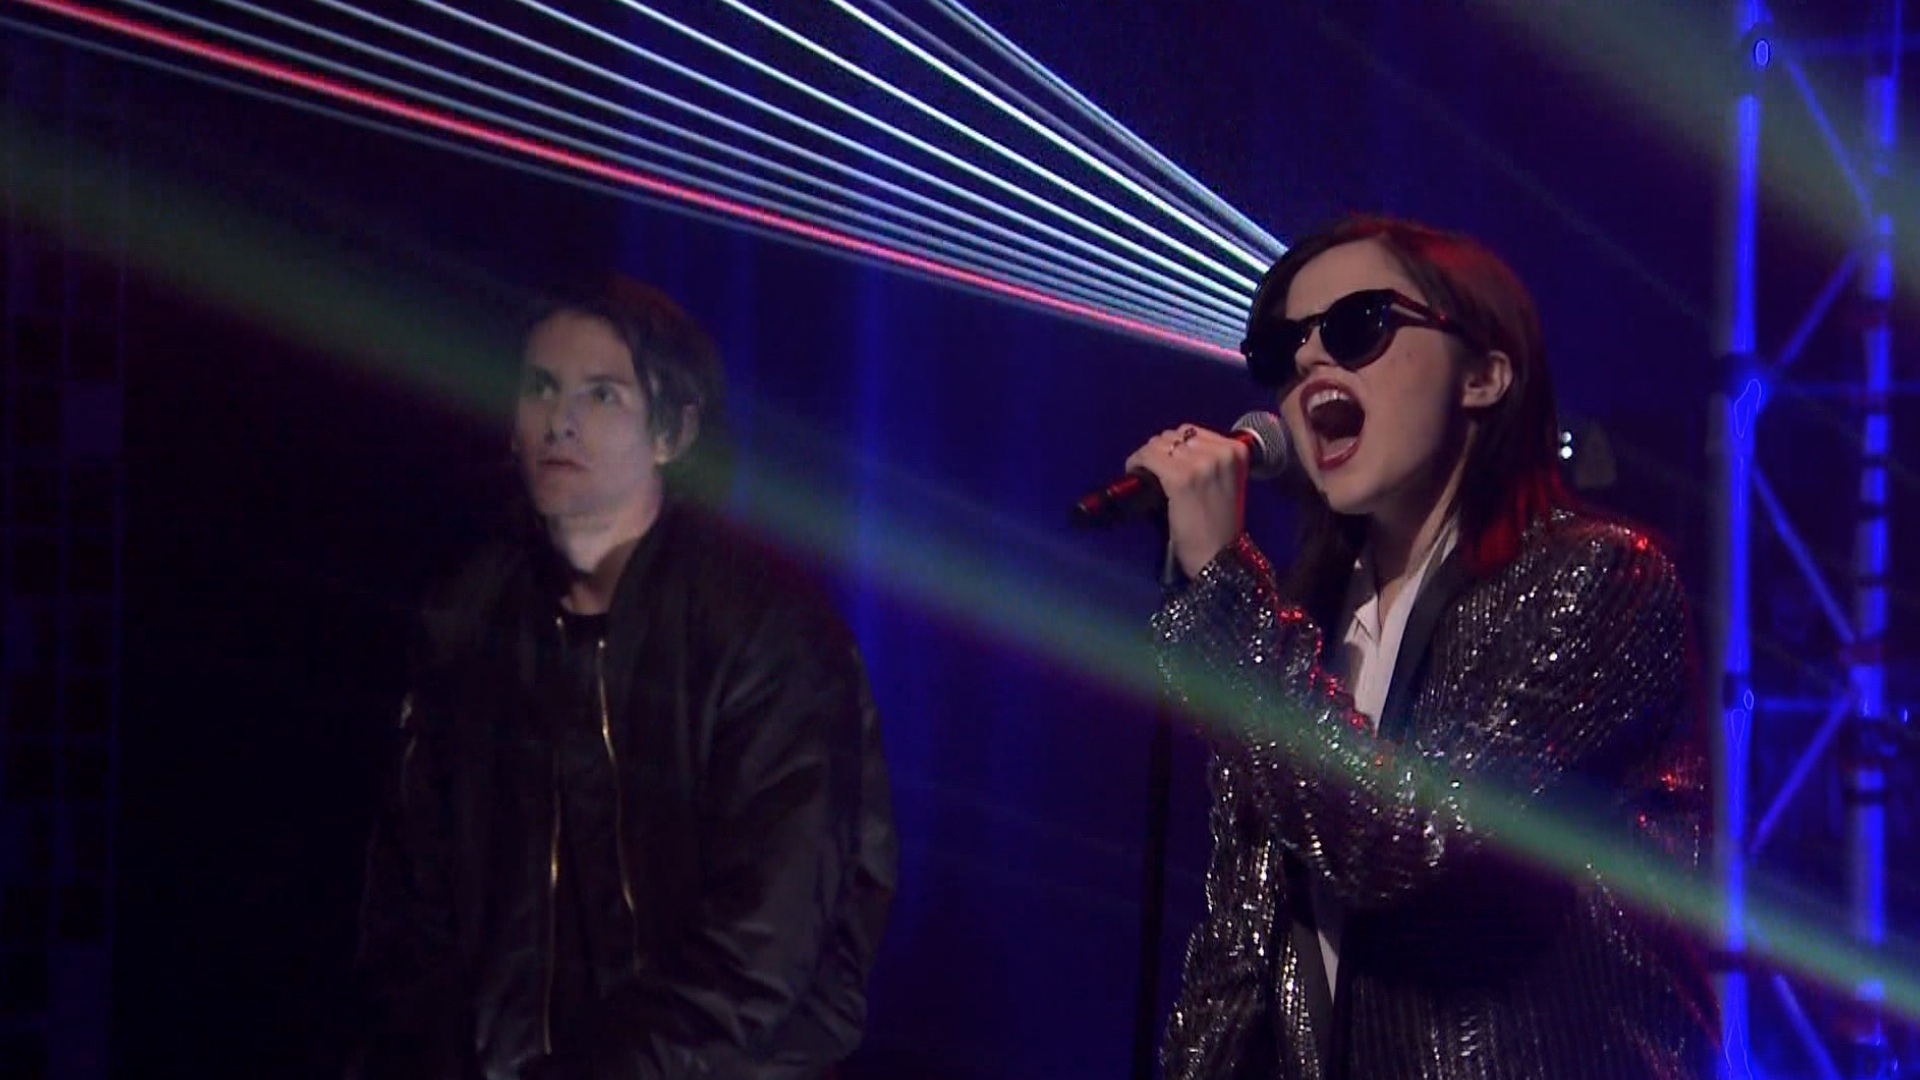 Sky Ferreira Performs “I Blame Myself” with a Laser Light Show on “The Tonight Show”